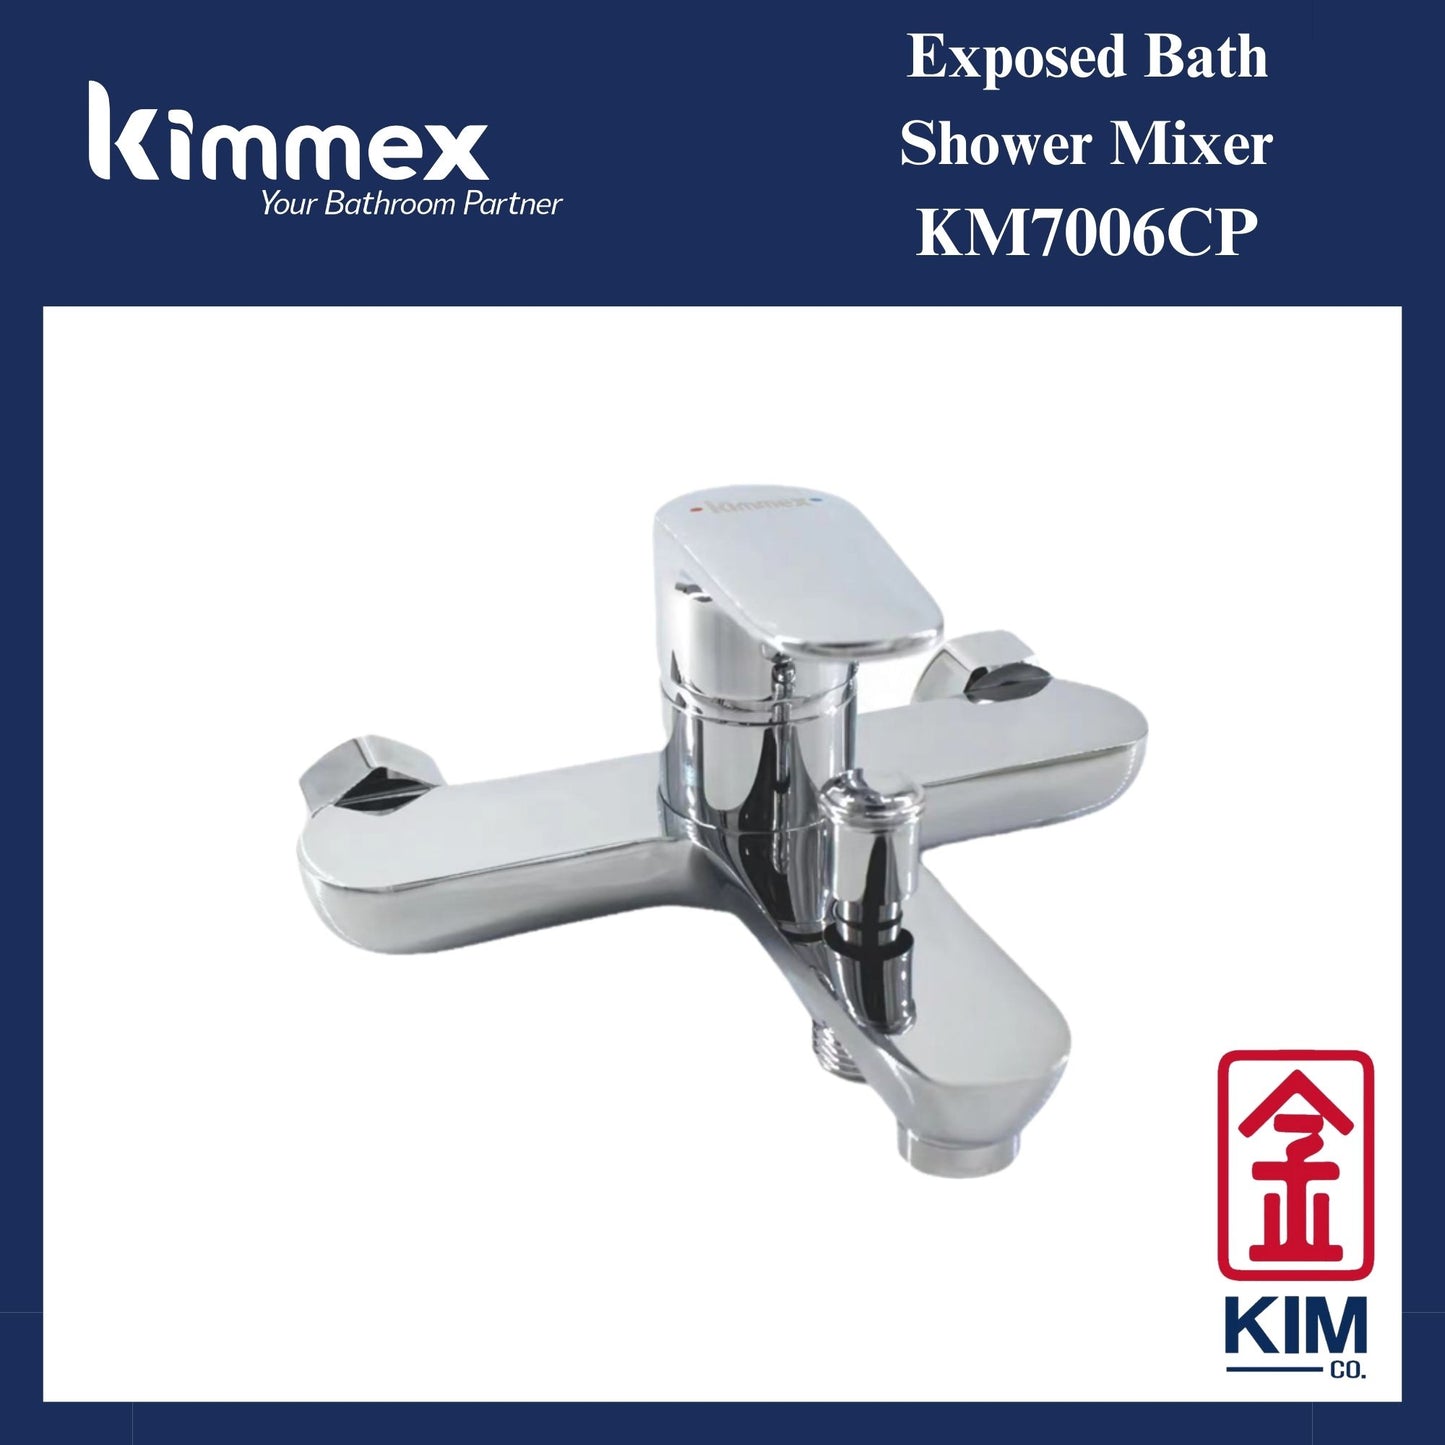 kimmex A Series Exposed Bath Shower Mixer Without Shower Kit (KM7006CP)